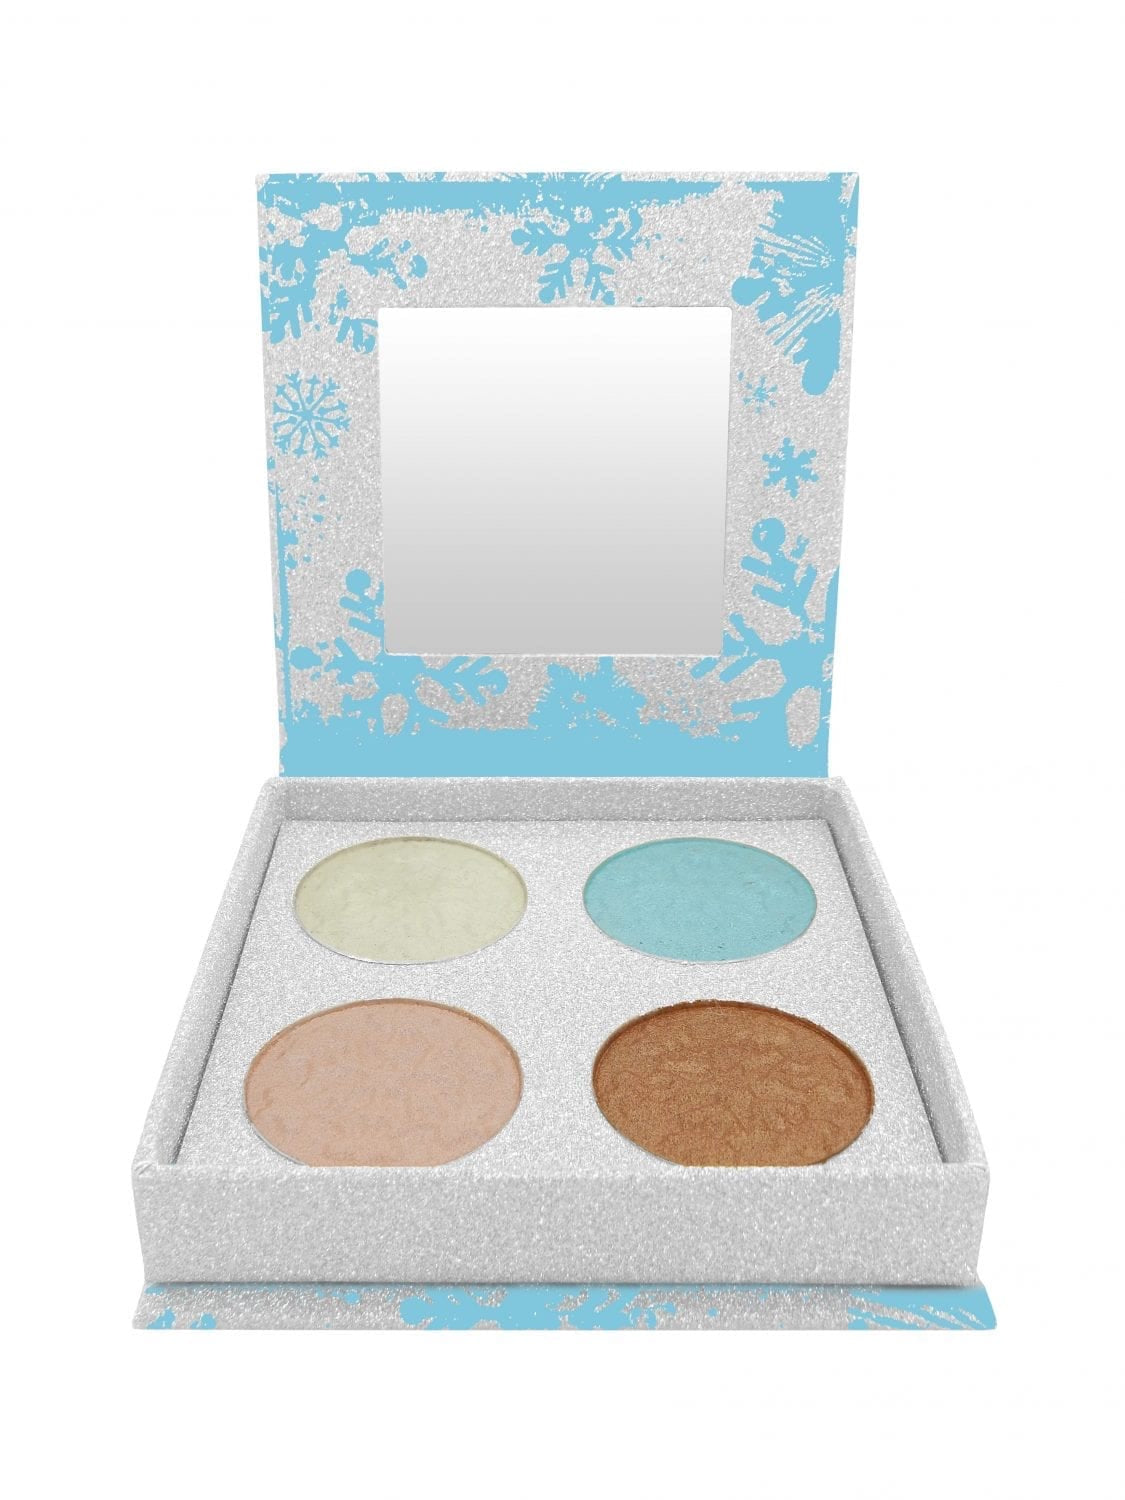 W7 Frosted Festive Icy Shimmers Pallette